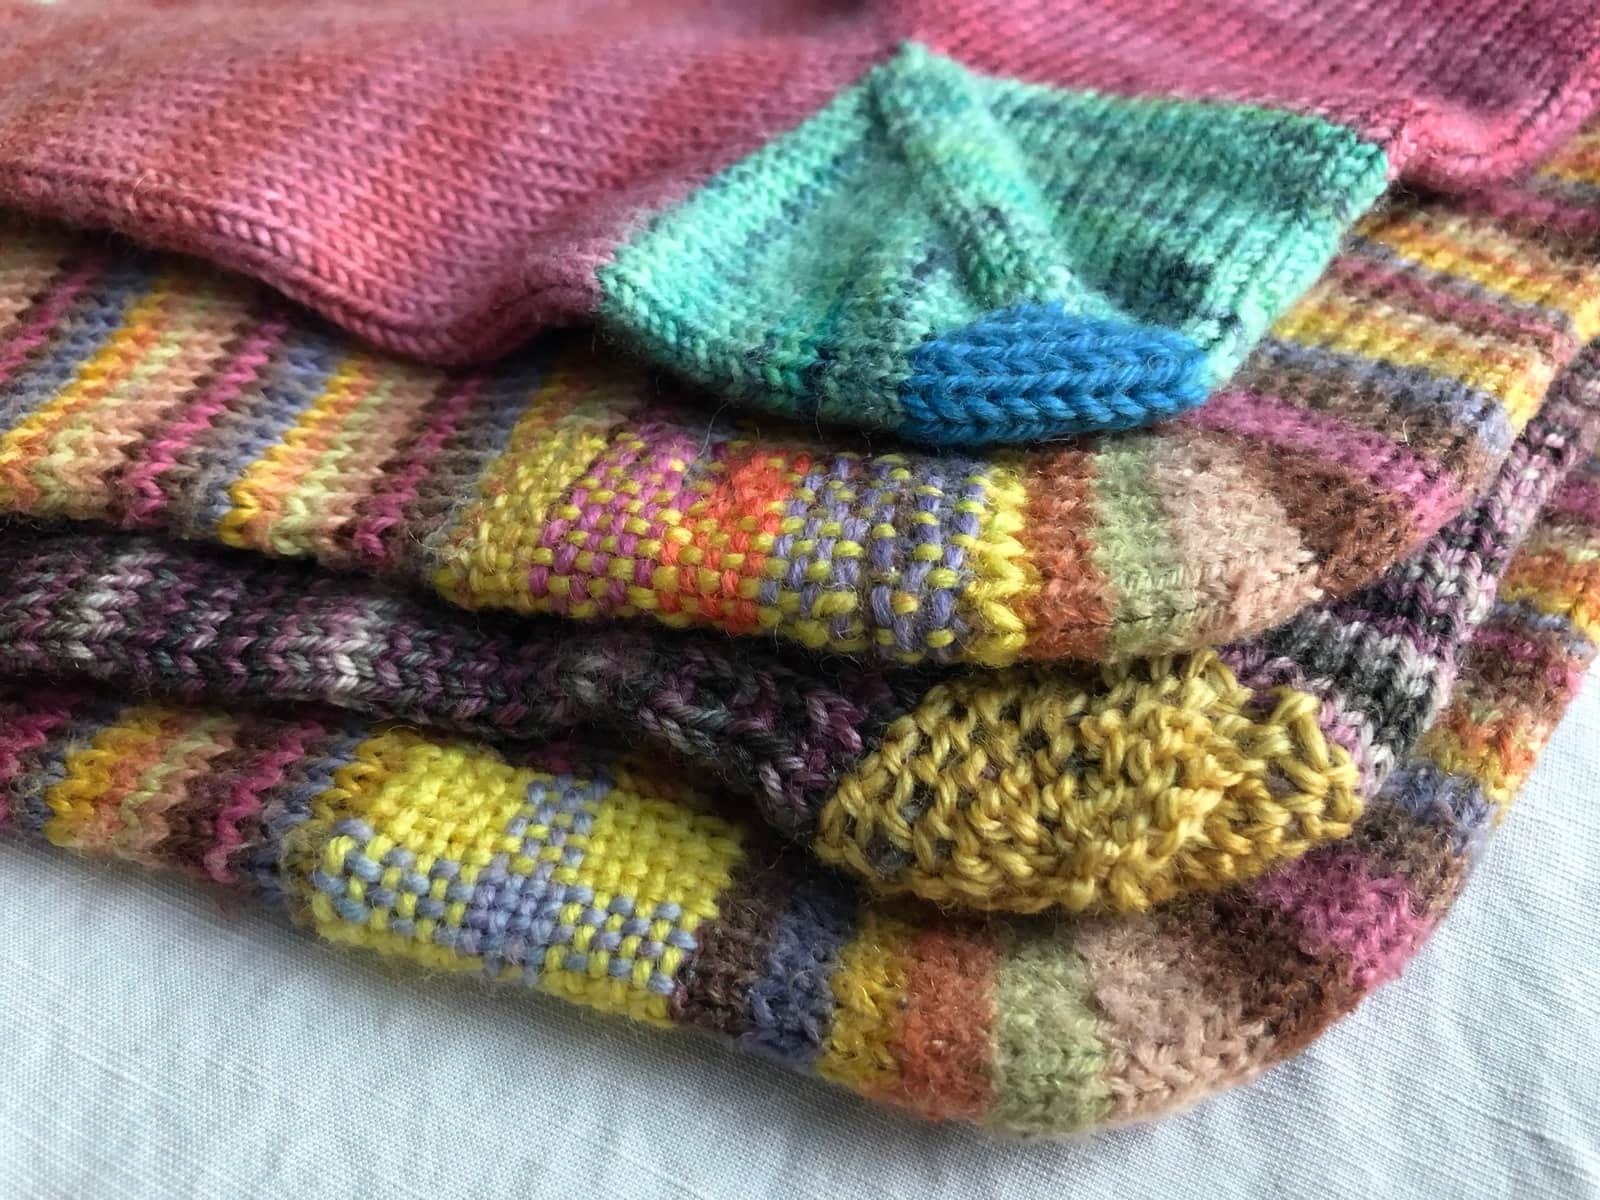 image description: a pile of handknit socks, with evident mends